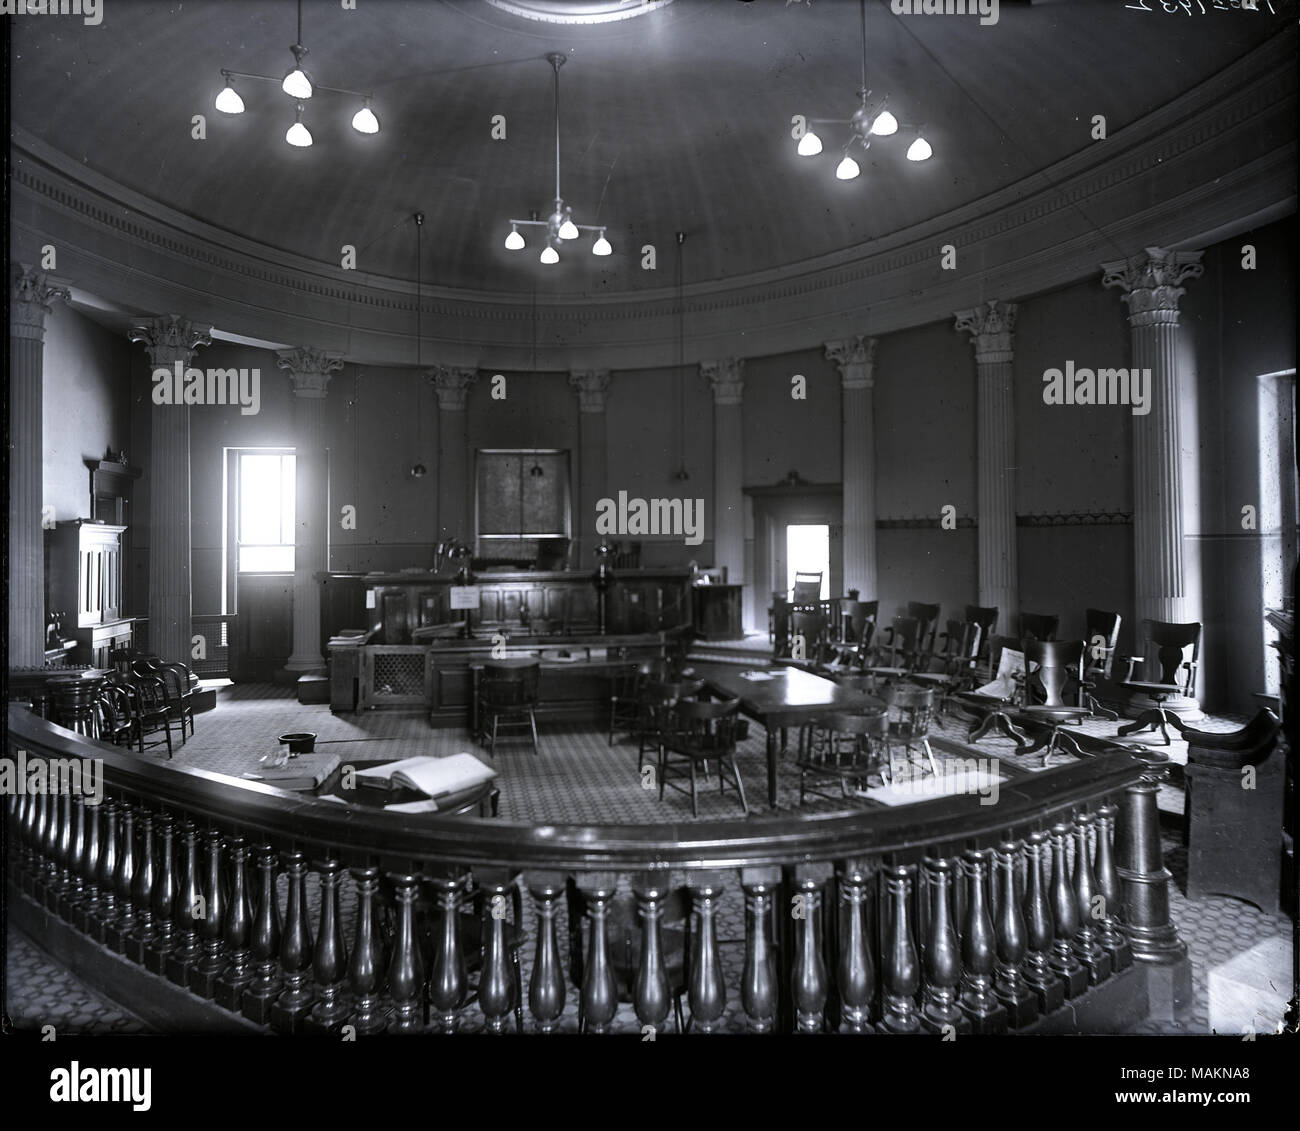 Horizontal, black and white photograph showing an interior view of the court room at the Old Courthouse. A wooden rail curves around the room in the foreground, and the judge's bench can be seen in the background. Columns line the walls of the room, which also has a domed ceiling. Title: Interior view of the court room at the Old Courthouse.  . between 1900 and 1920. Stock Photo